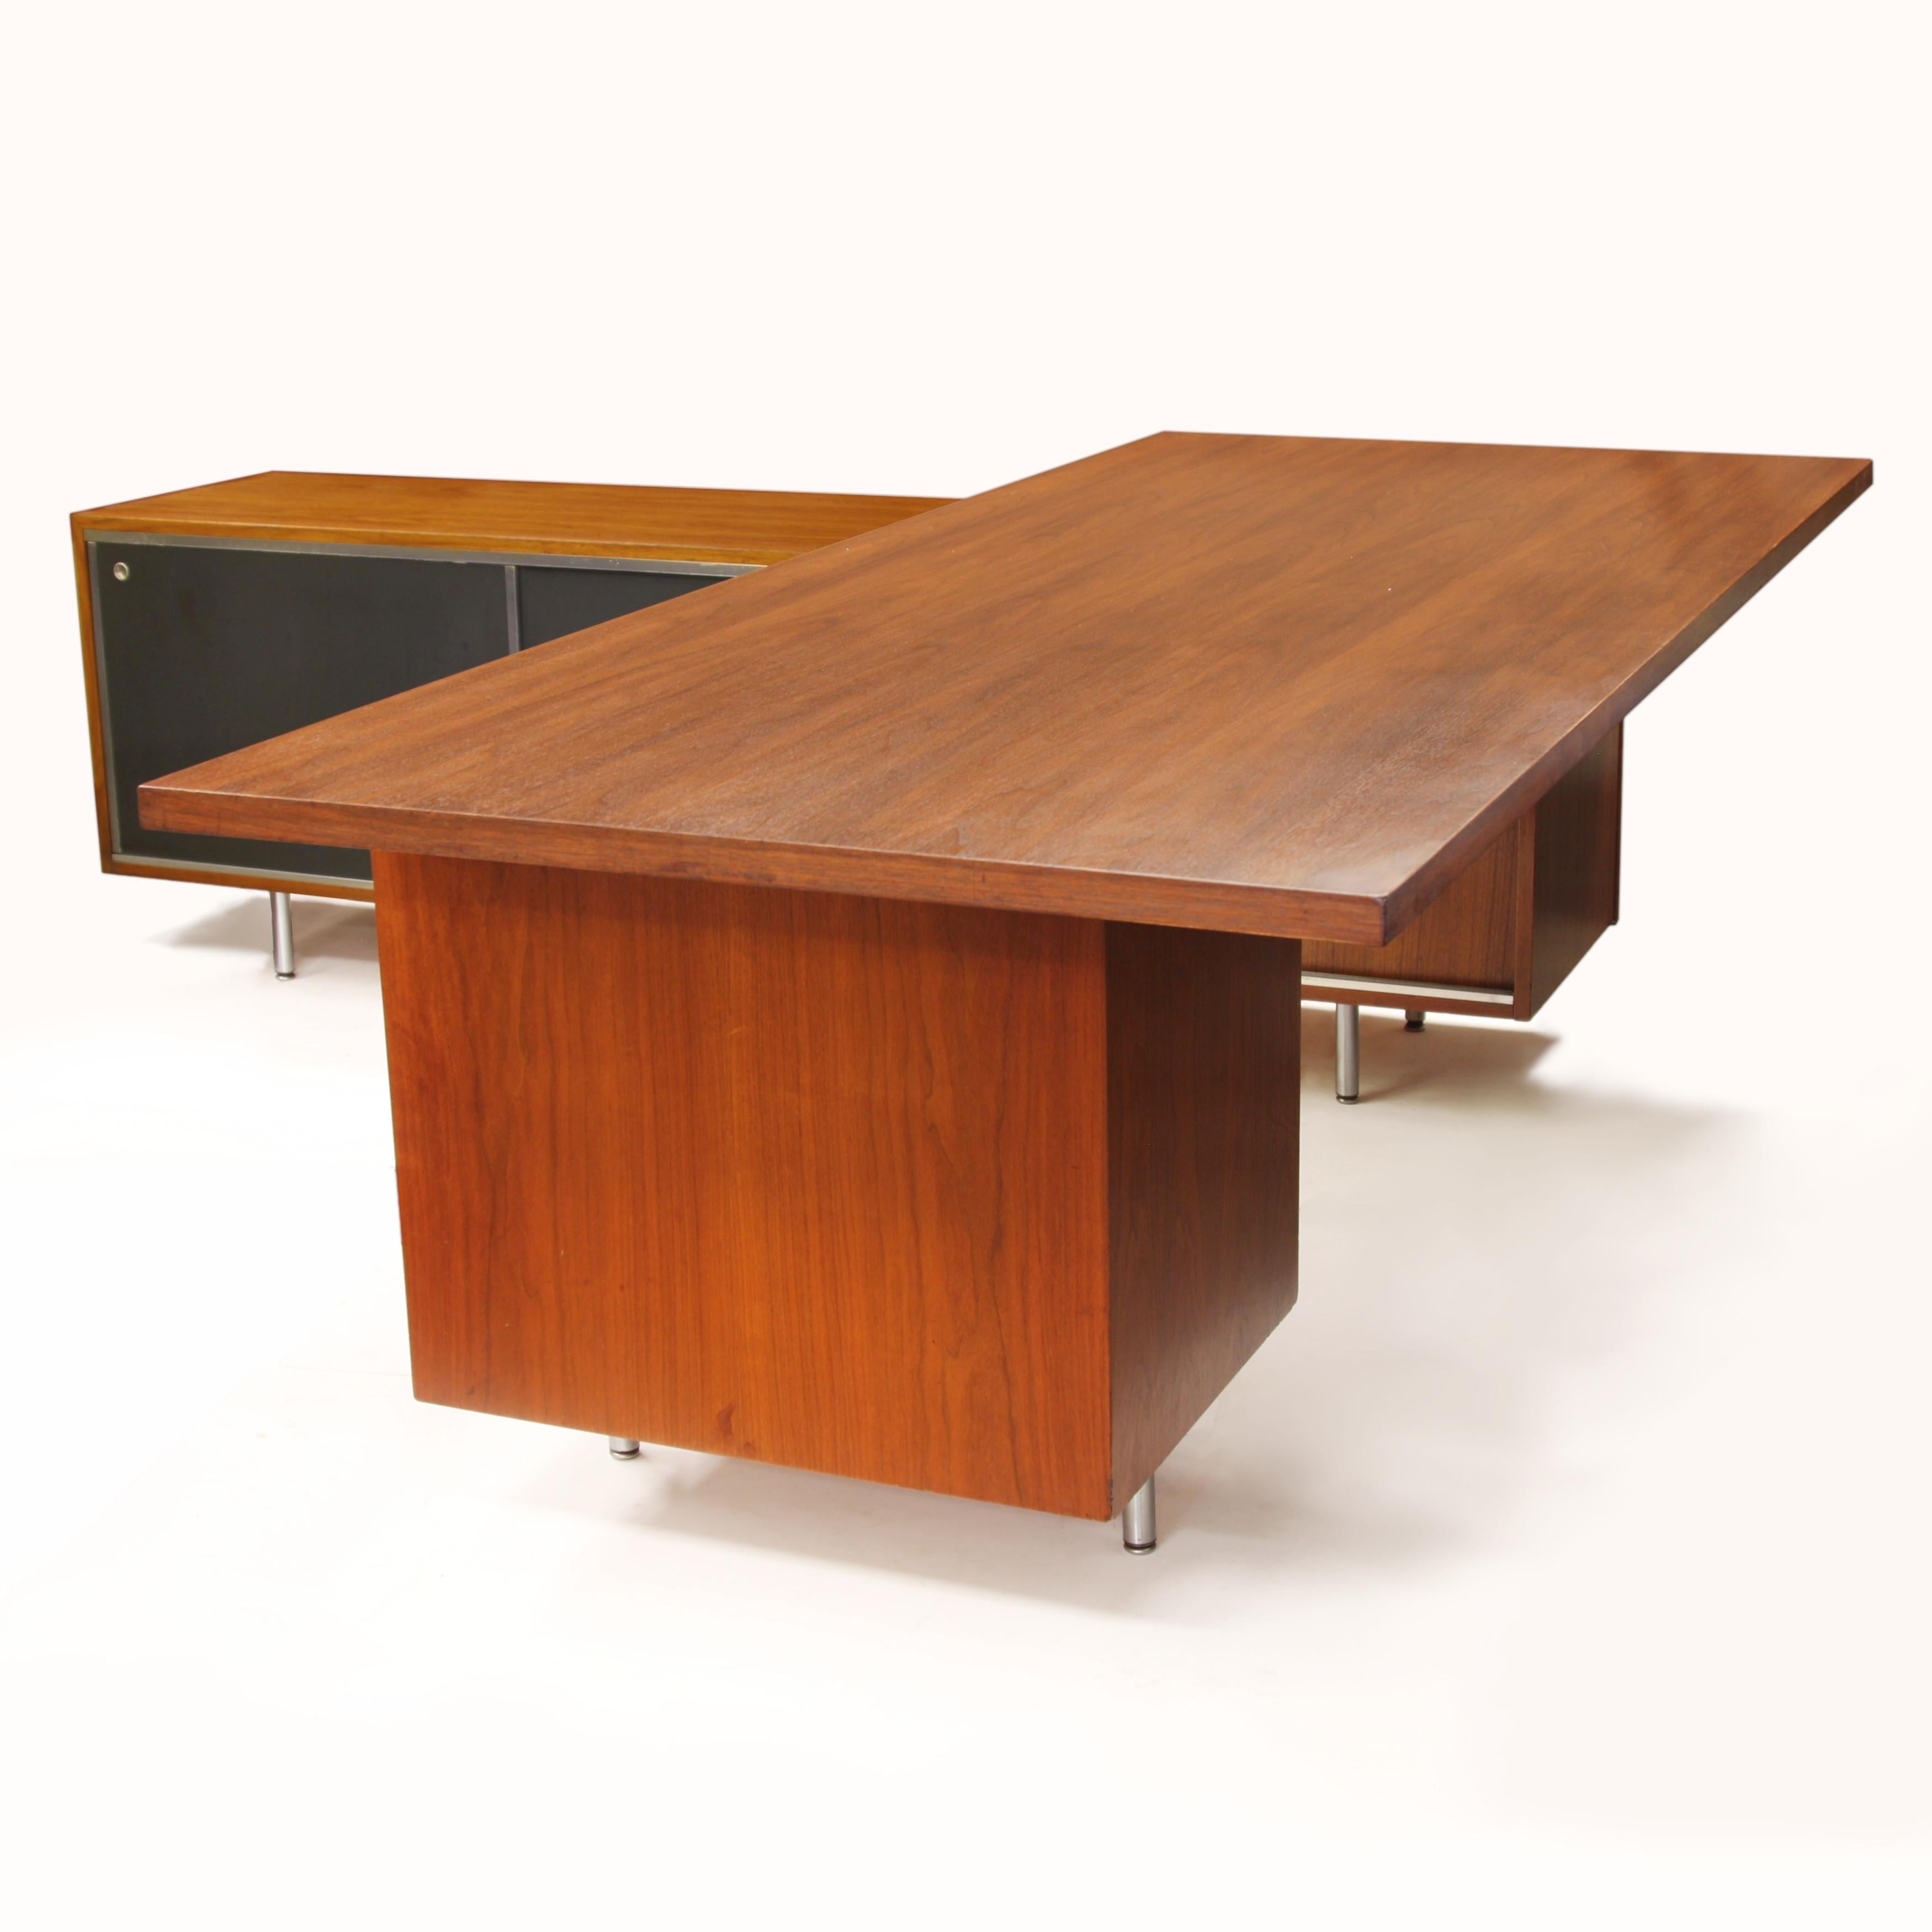 American Mid Century Modern L-Shaped Executive Desk by George Nelson for Herman Miller